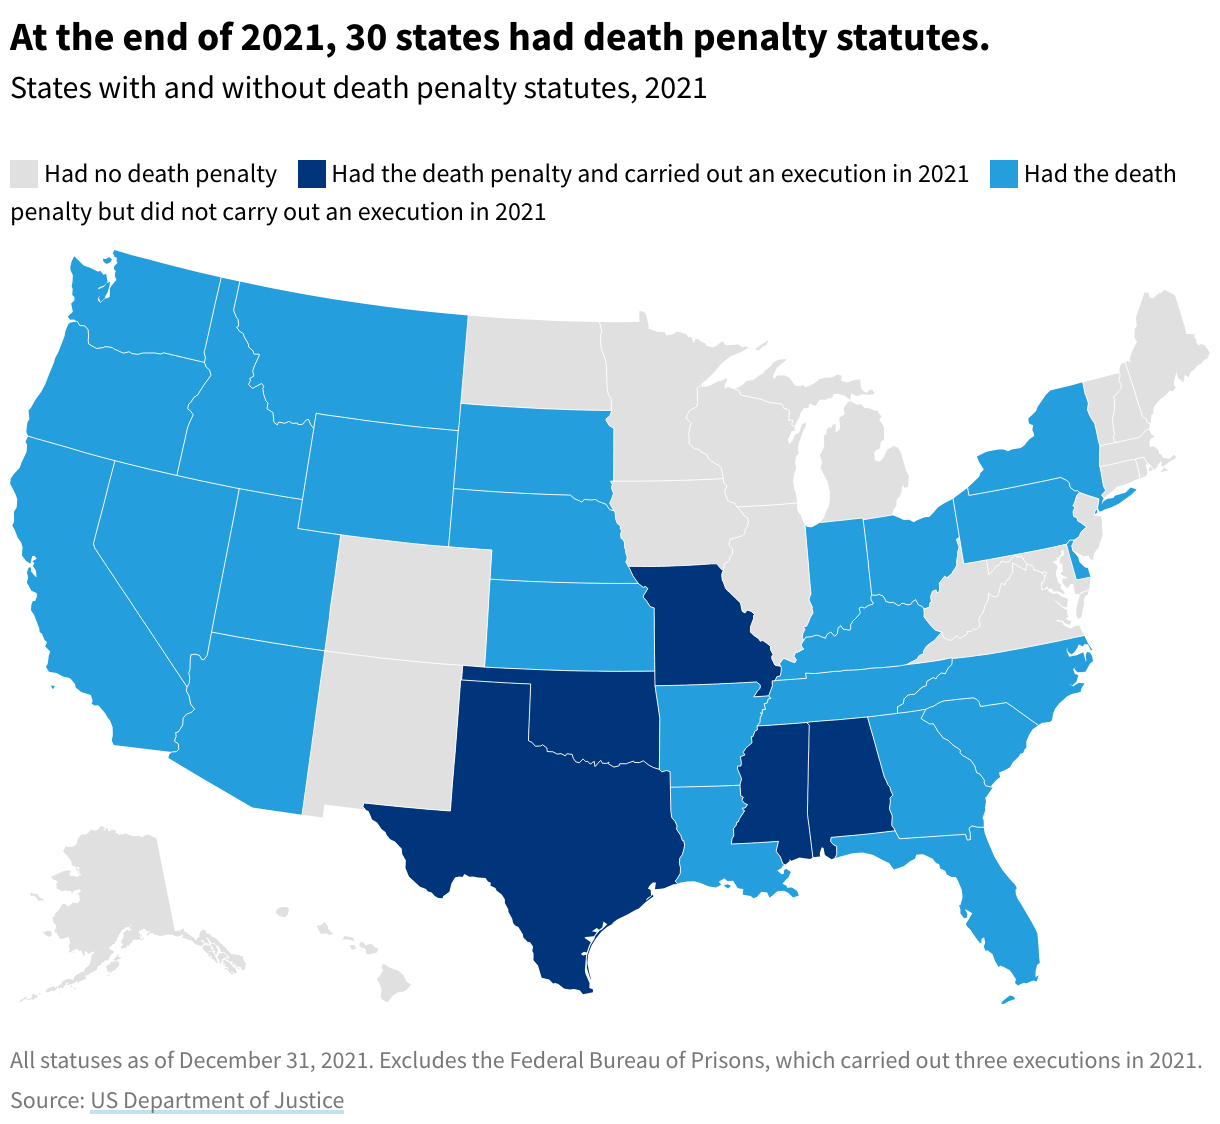 Choropleth of the US showing death penalty statues by state.